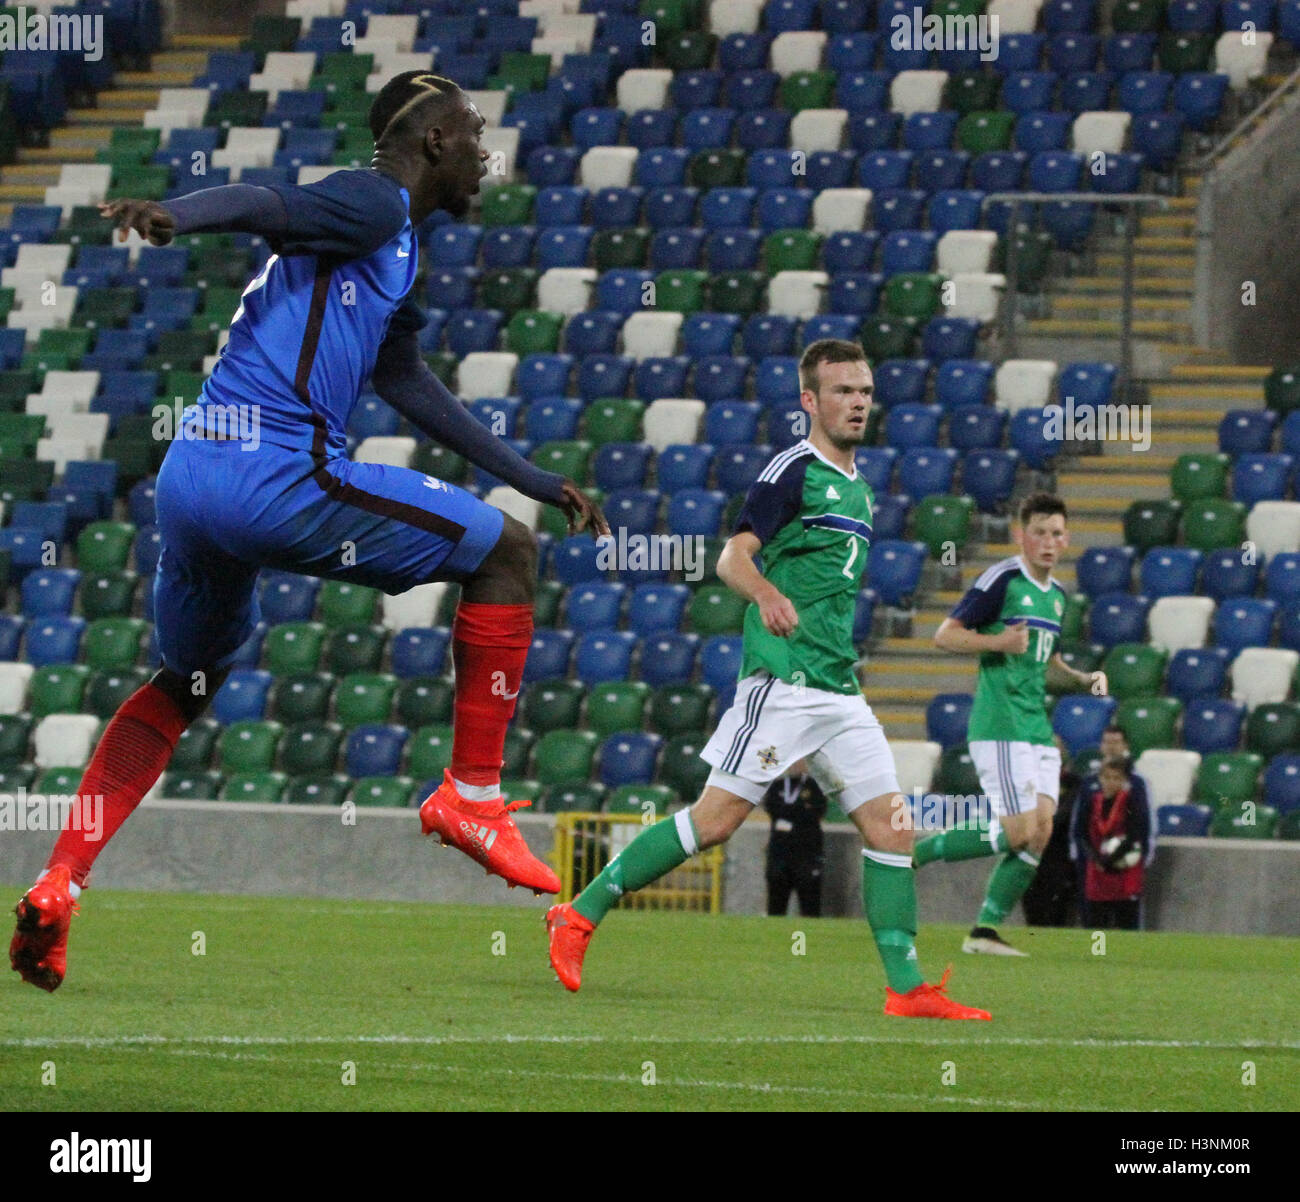 National Football Stadium at Windsor Park, Belfast, Northern Ireland. 11 Oct 2016.France's Jean-Kevin Augustin fires in his second goal. David Hunter/Alamy Live News. Stock Photo